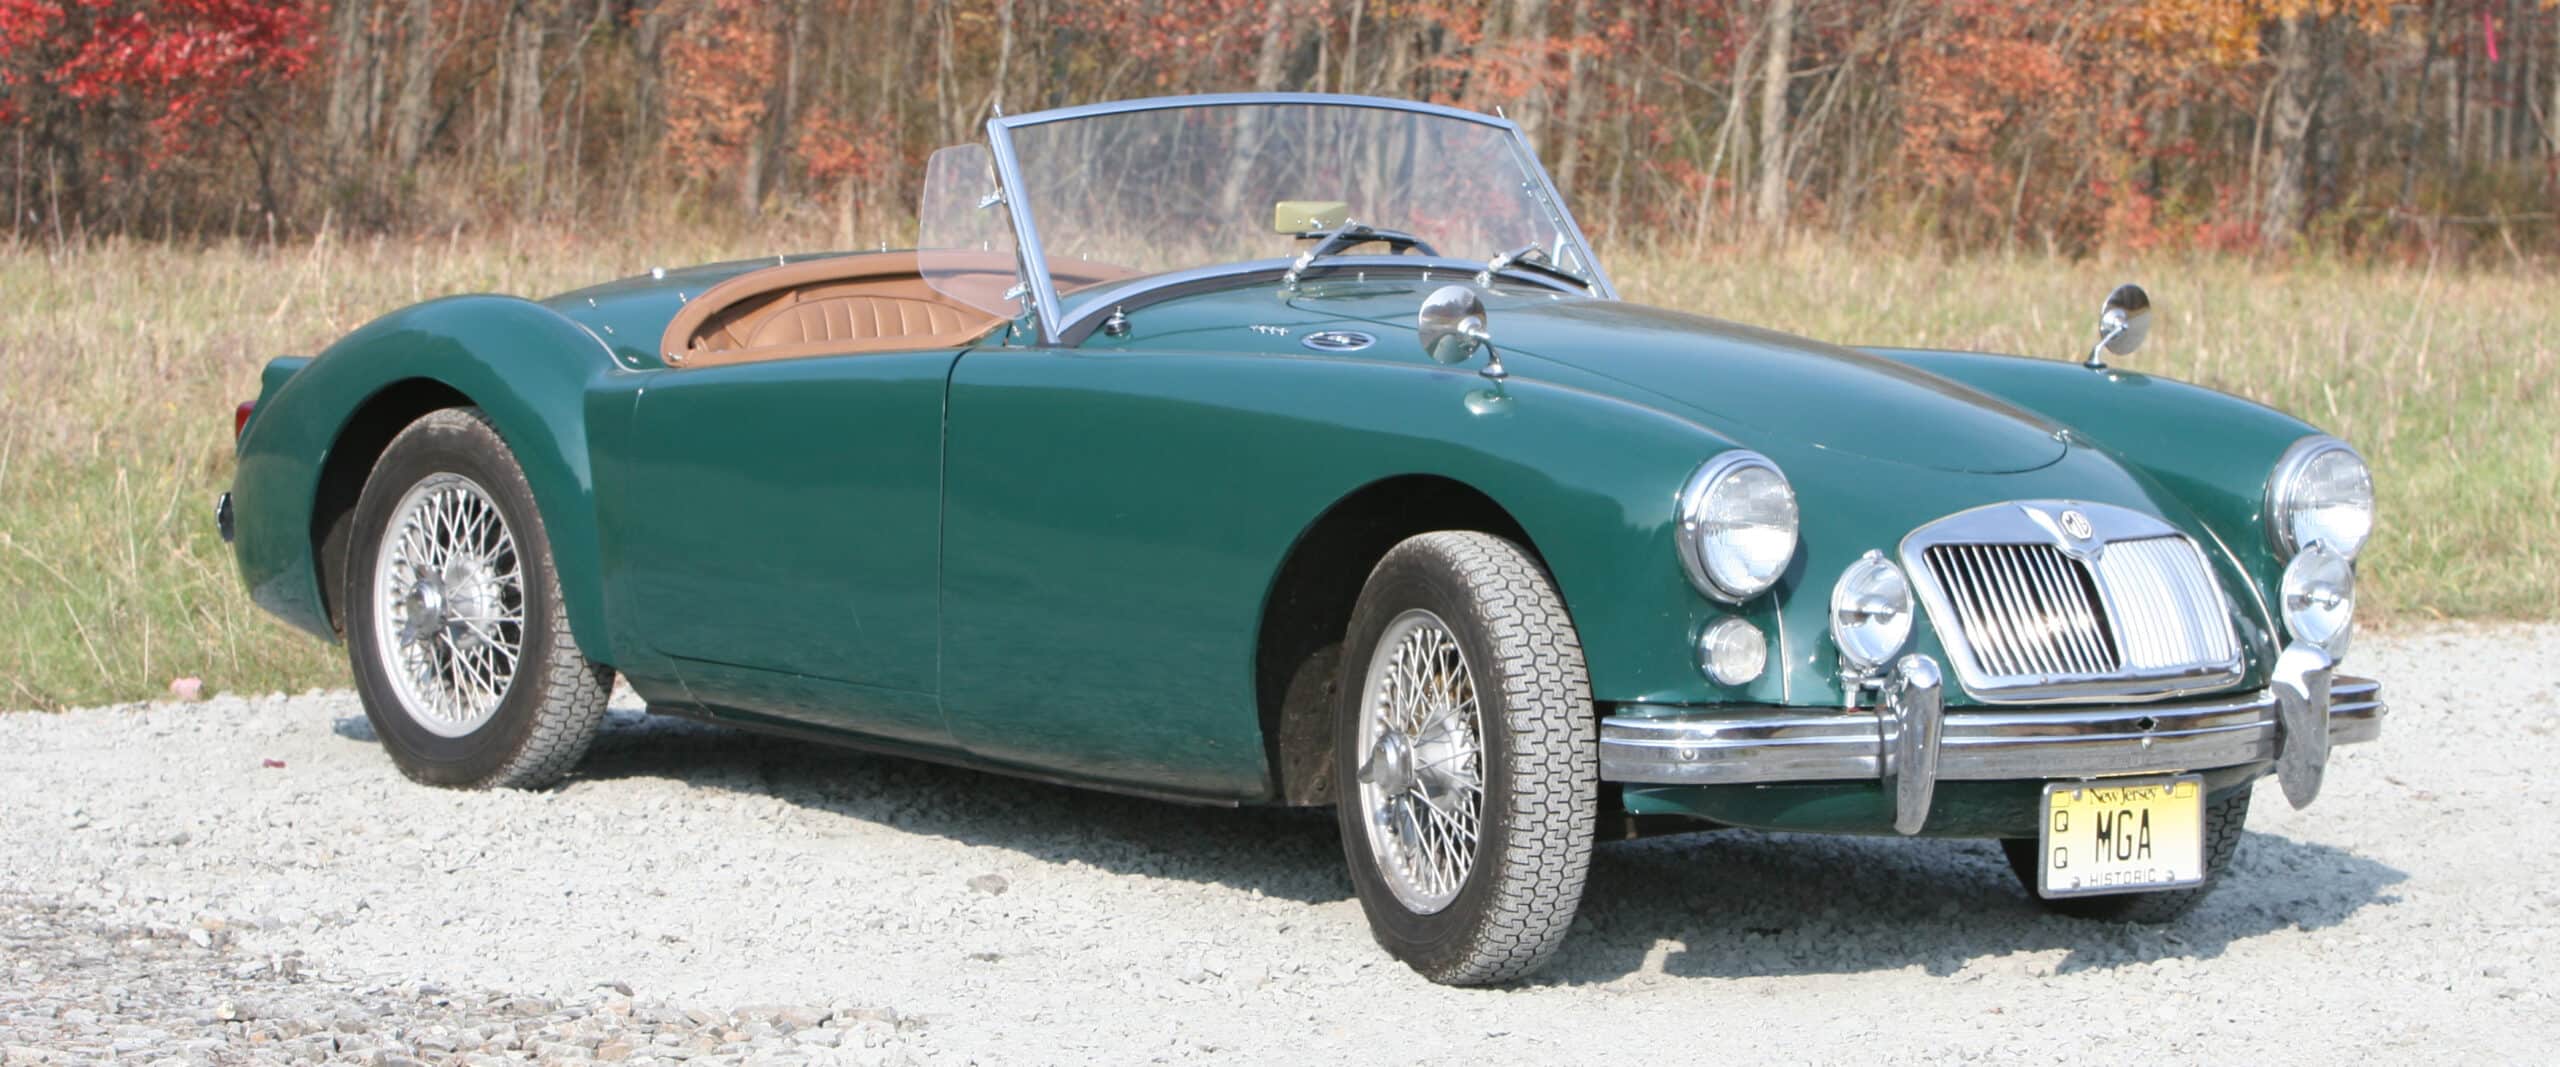 1961 MGA Owned By Paul Marzocca Panoramic Photo